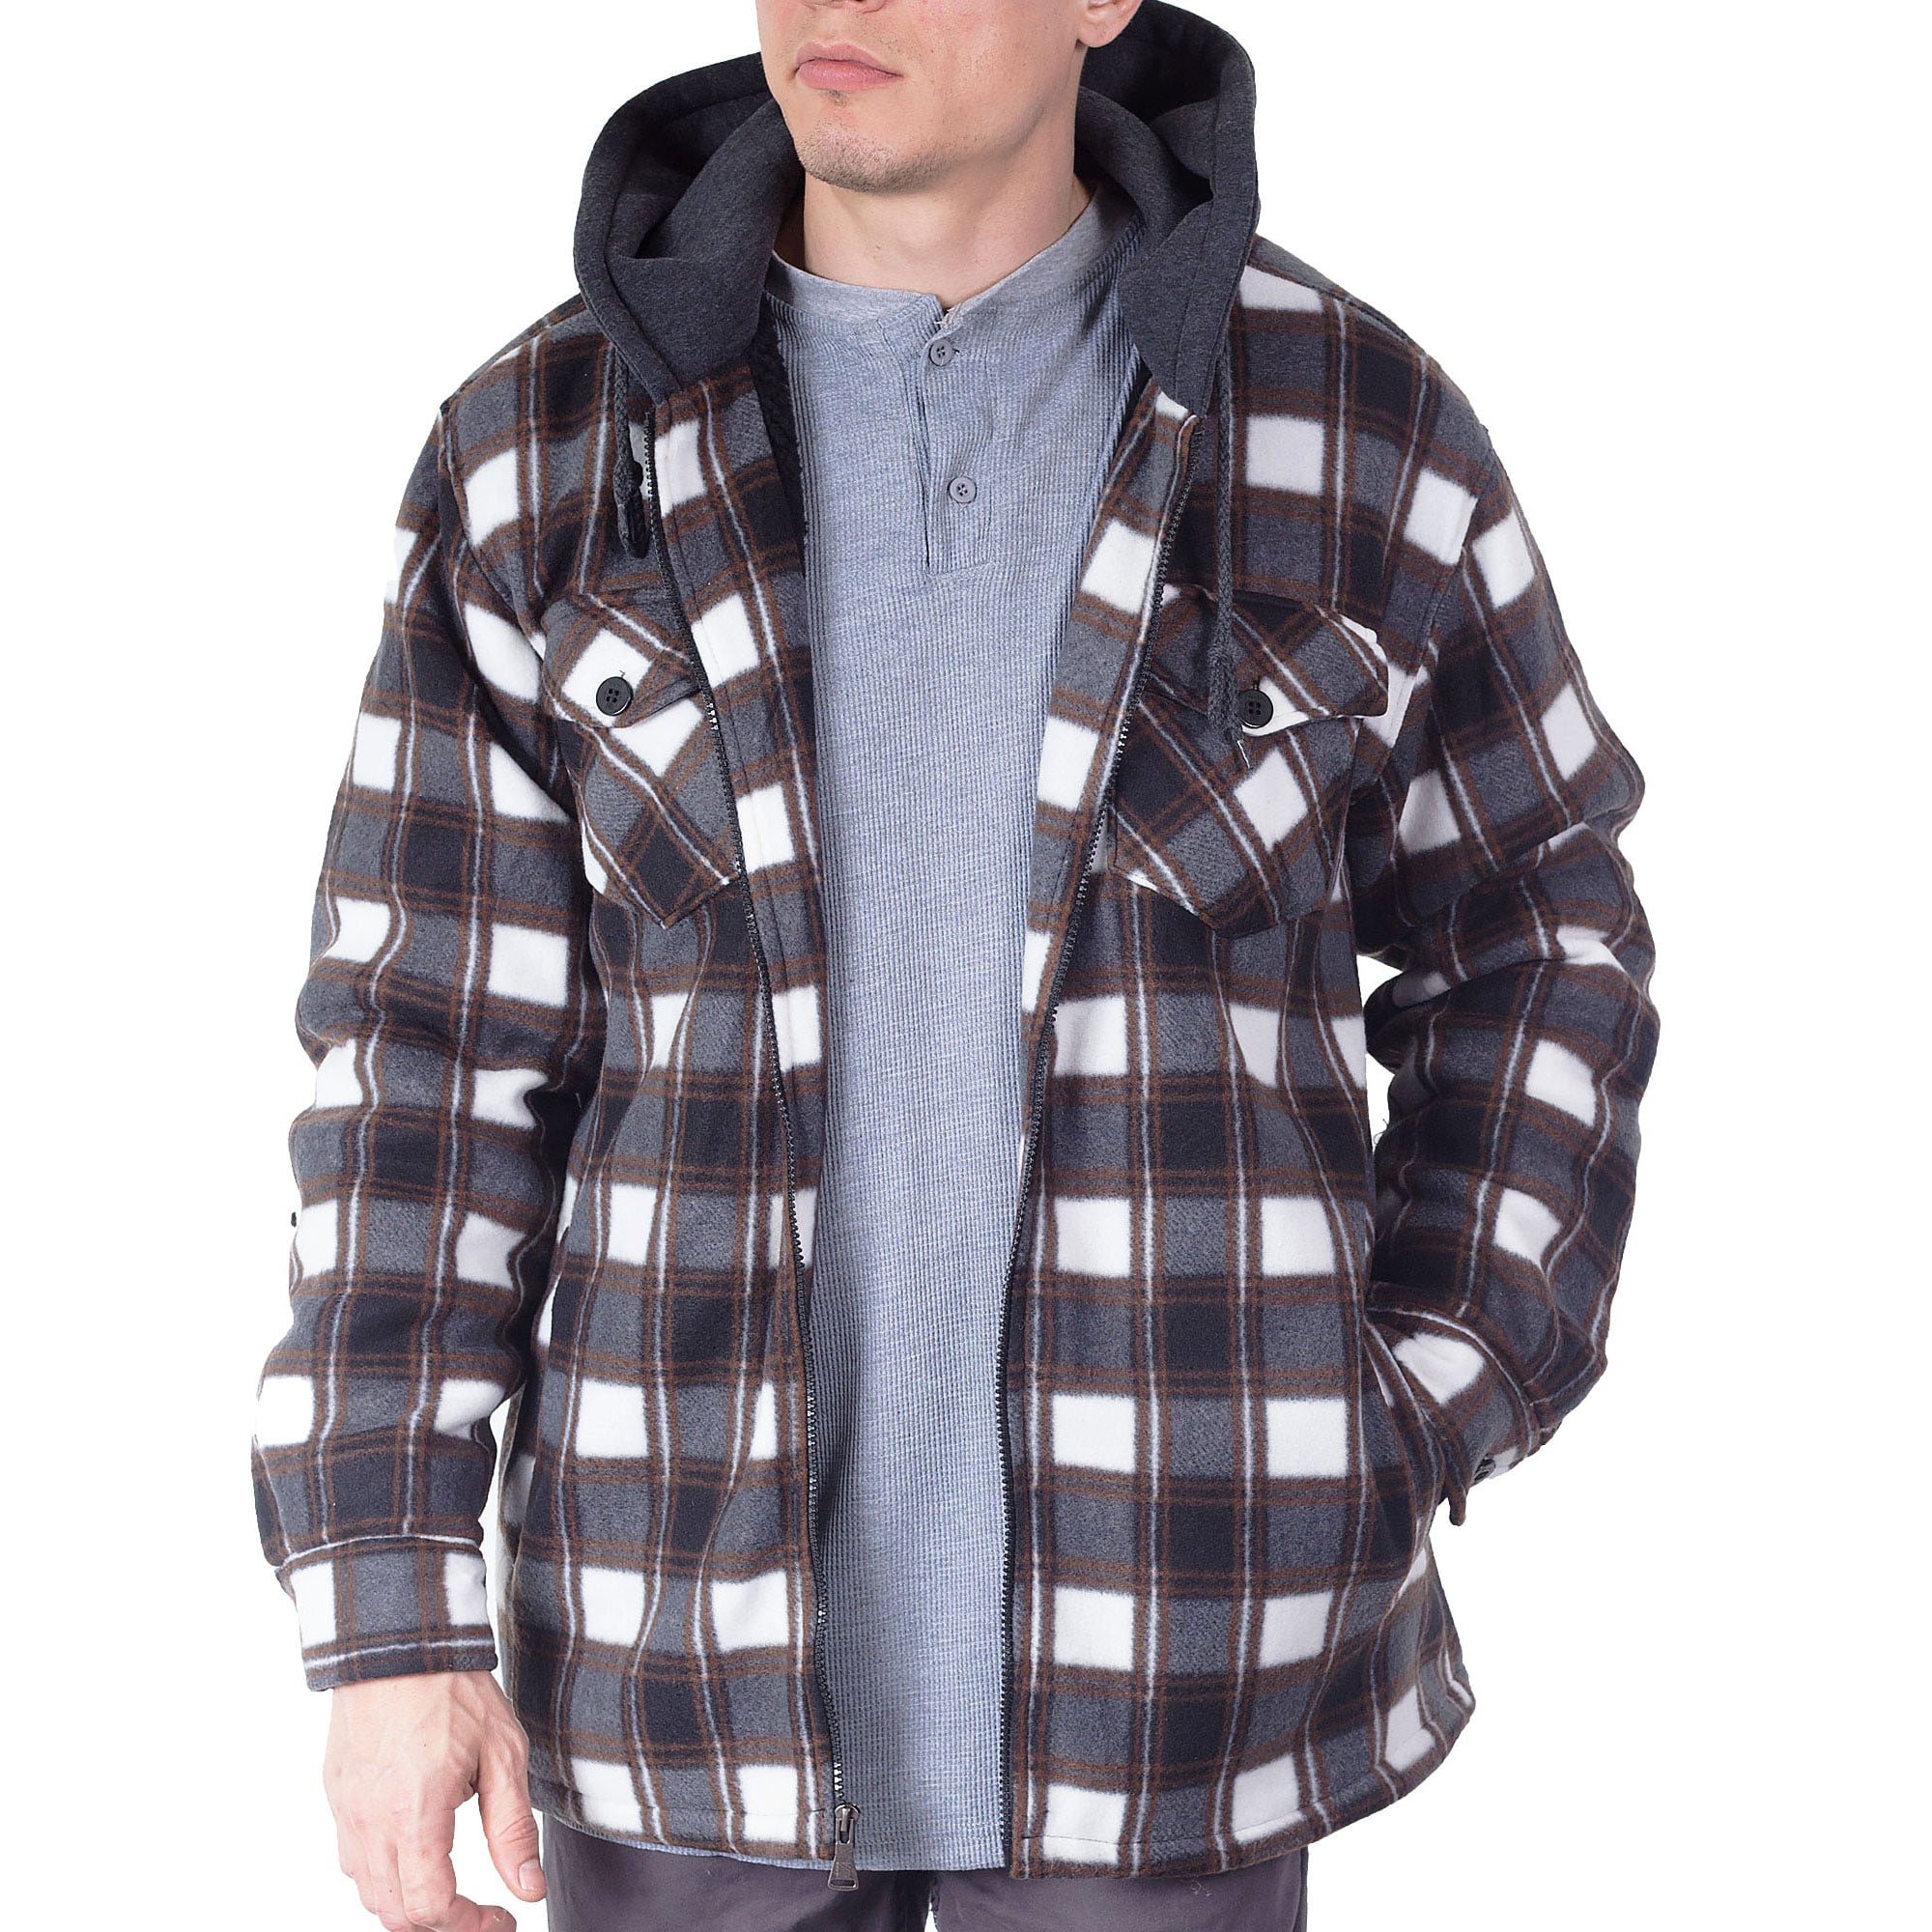 Visive - Visive Mens Flannel Jackets For Men Zip Up Hoodie Big And Tall ...